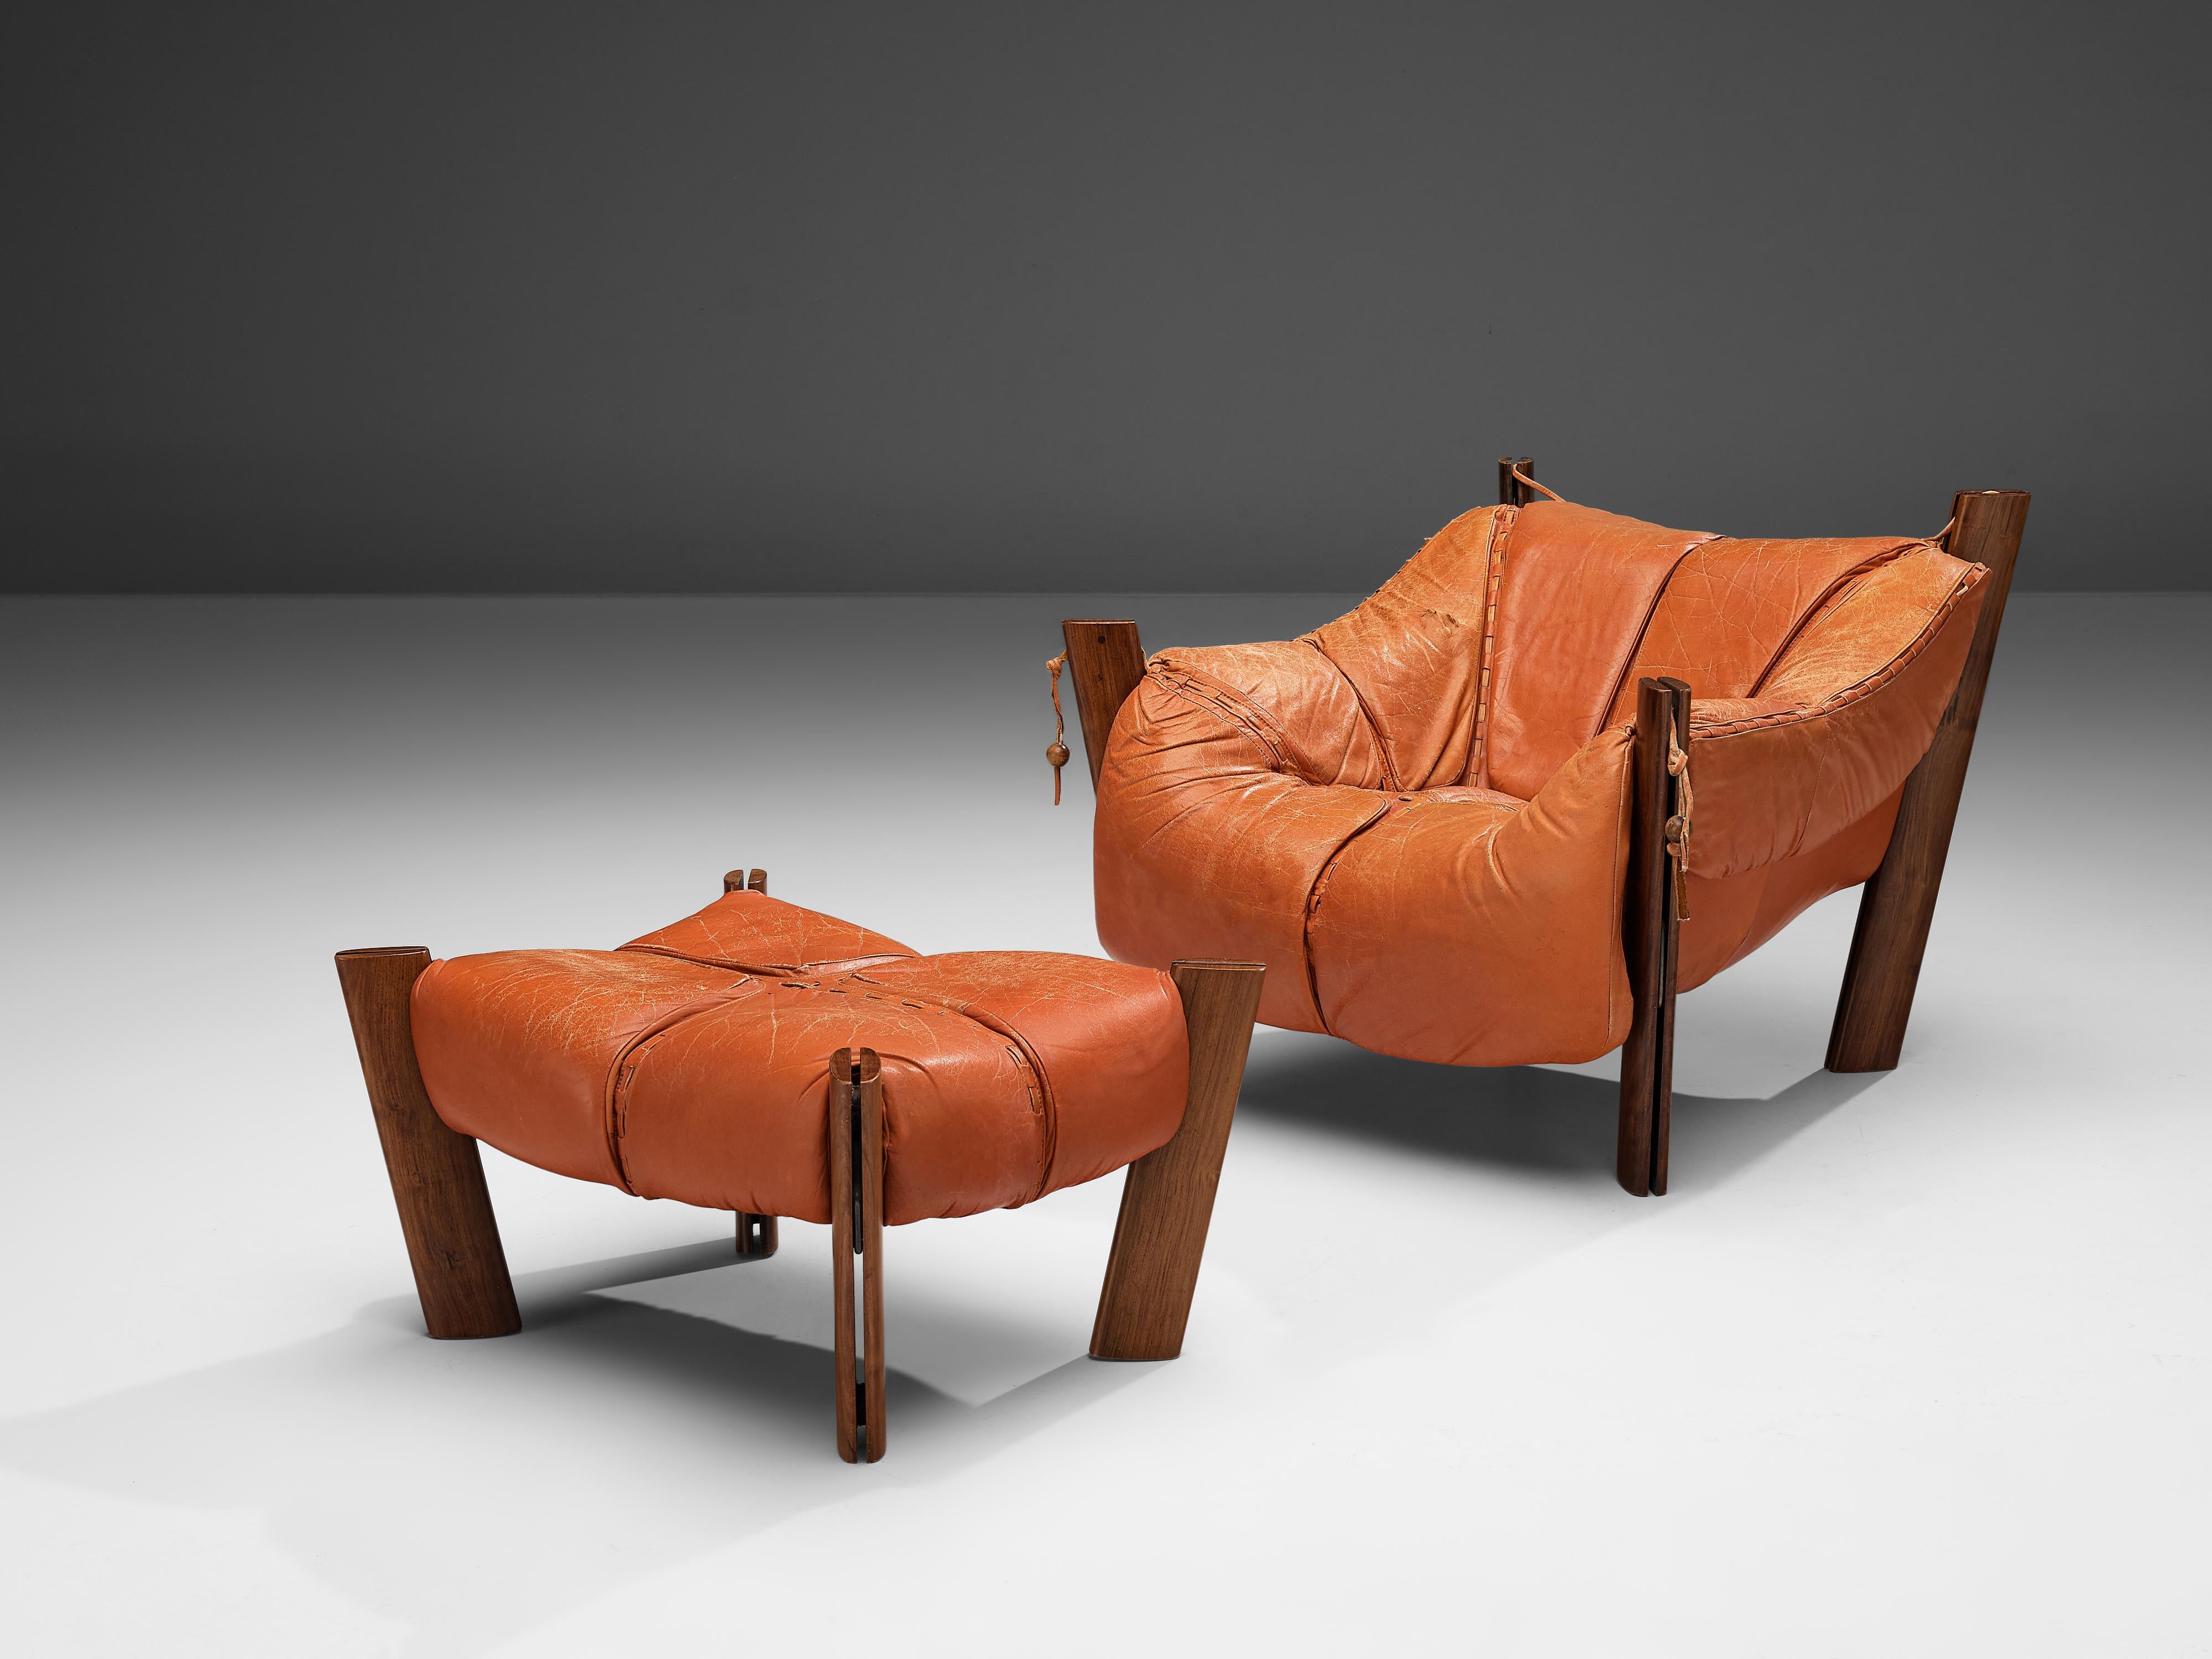 Percival Lafer, lounge chair with ottoman, model MP-211, hardwood, leather, Brazil, 1974

Bulky and volominous lounge chair with pouf by Brazilian designer Percival Lafer. This chair features a solid dark wooden base with leather seating spanned